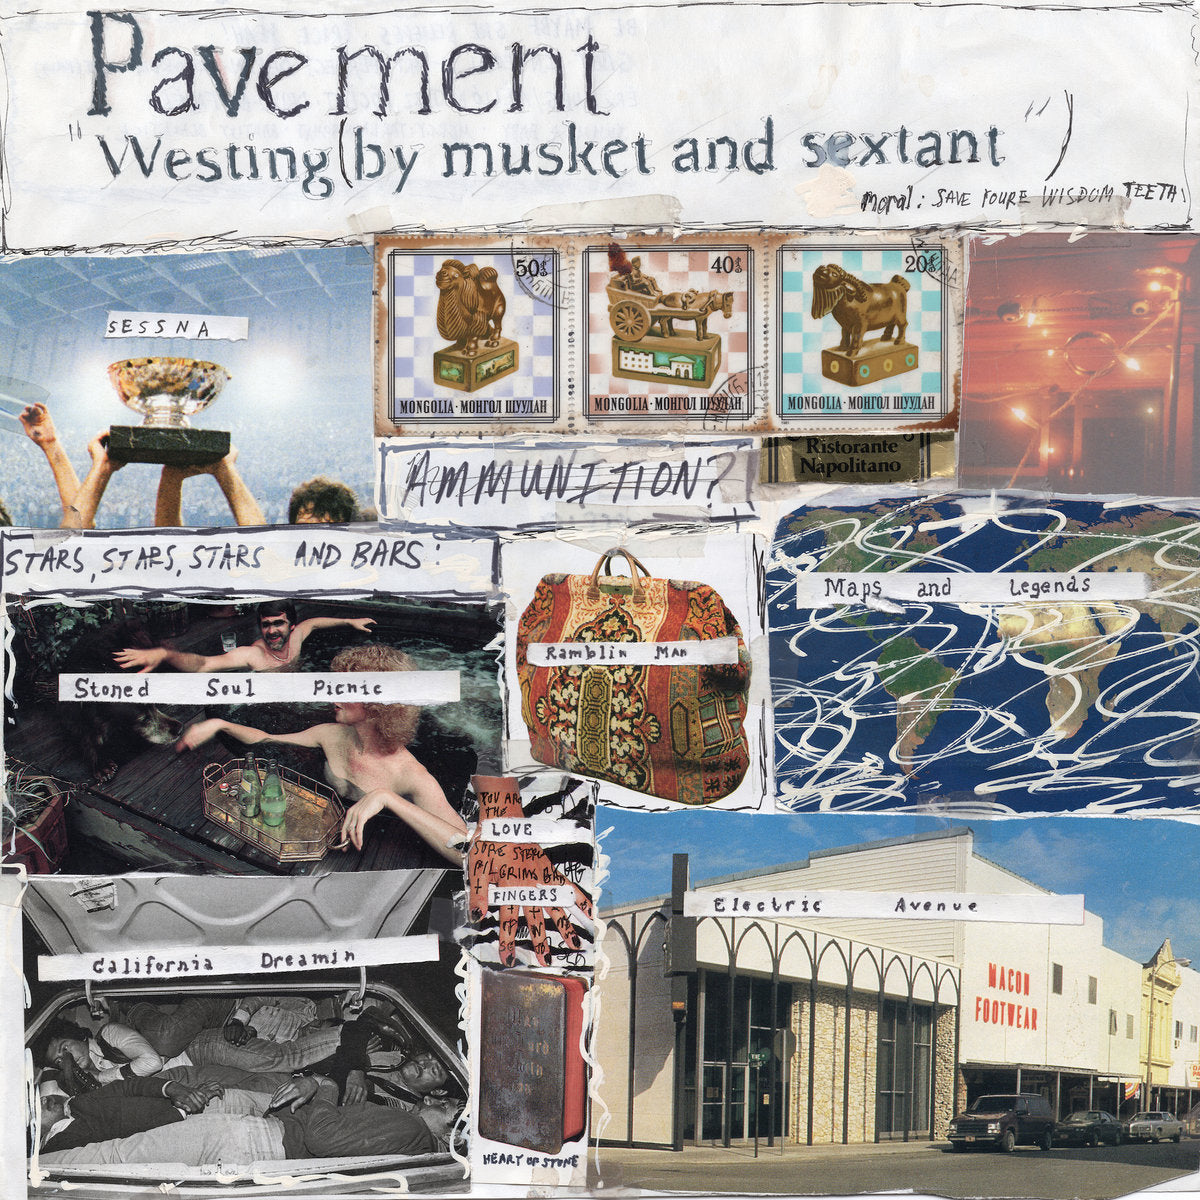 PAVEMENT - WESTING (BY MUSKET AND SEXTANT) Vinyl LP